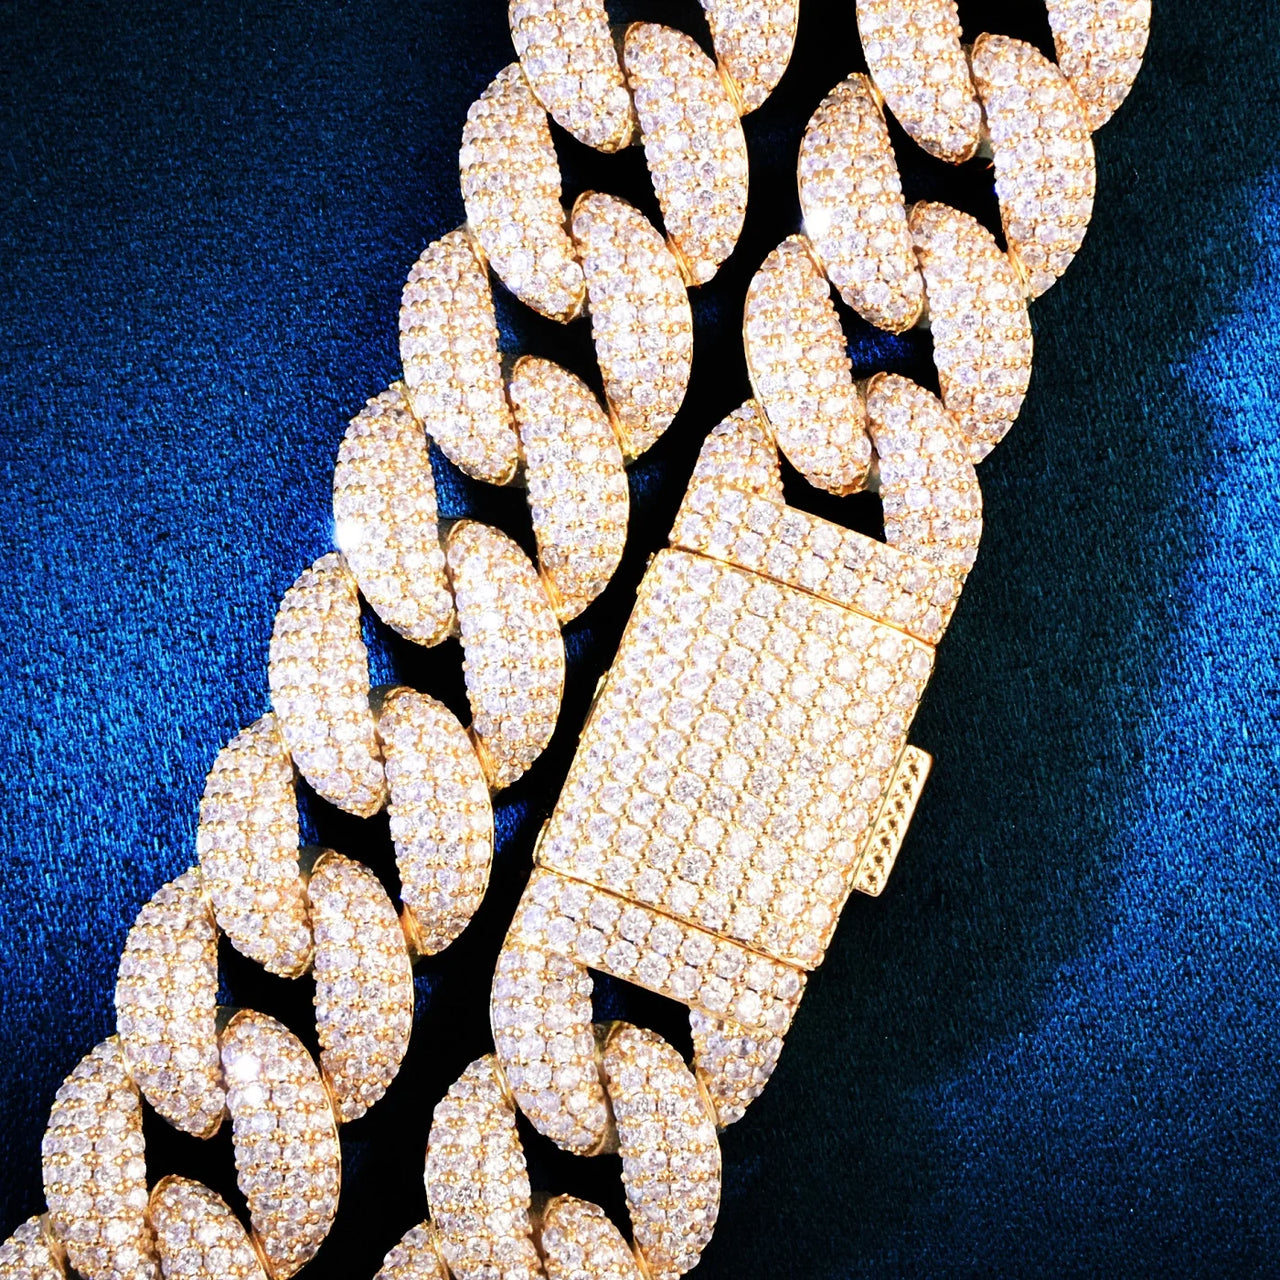 19mm Iced Miami Cuban Link Bracelet - Different Drips